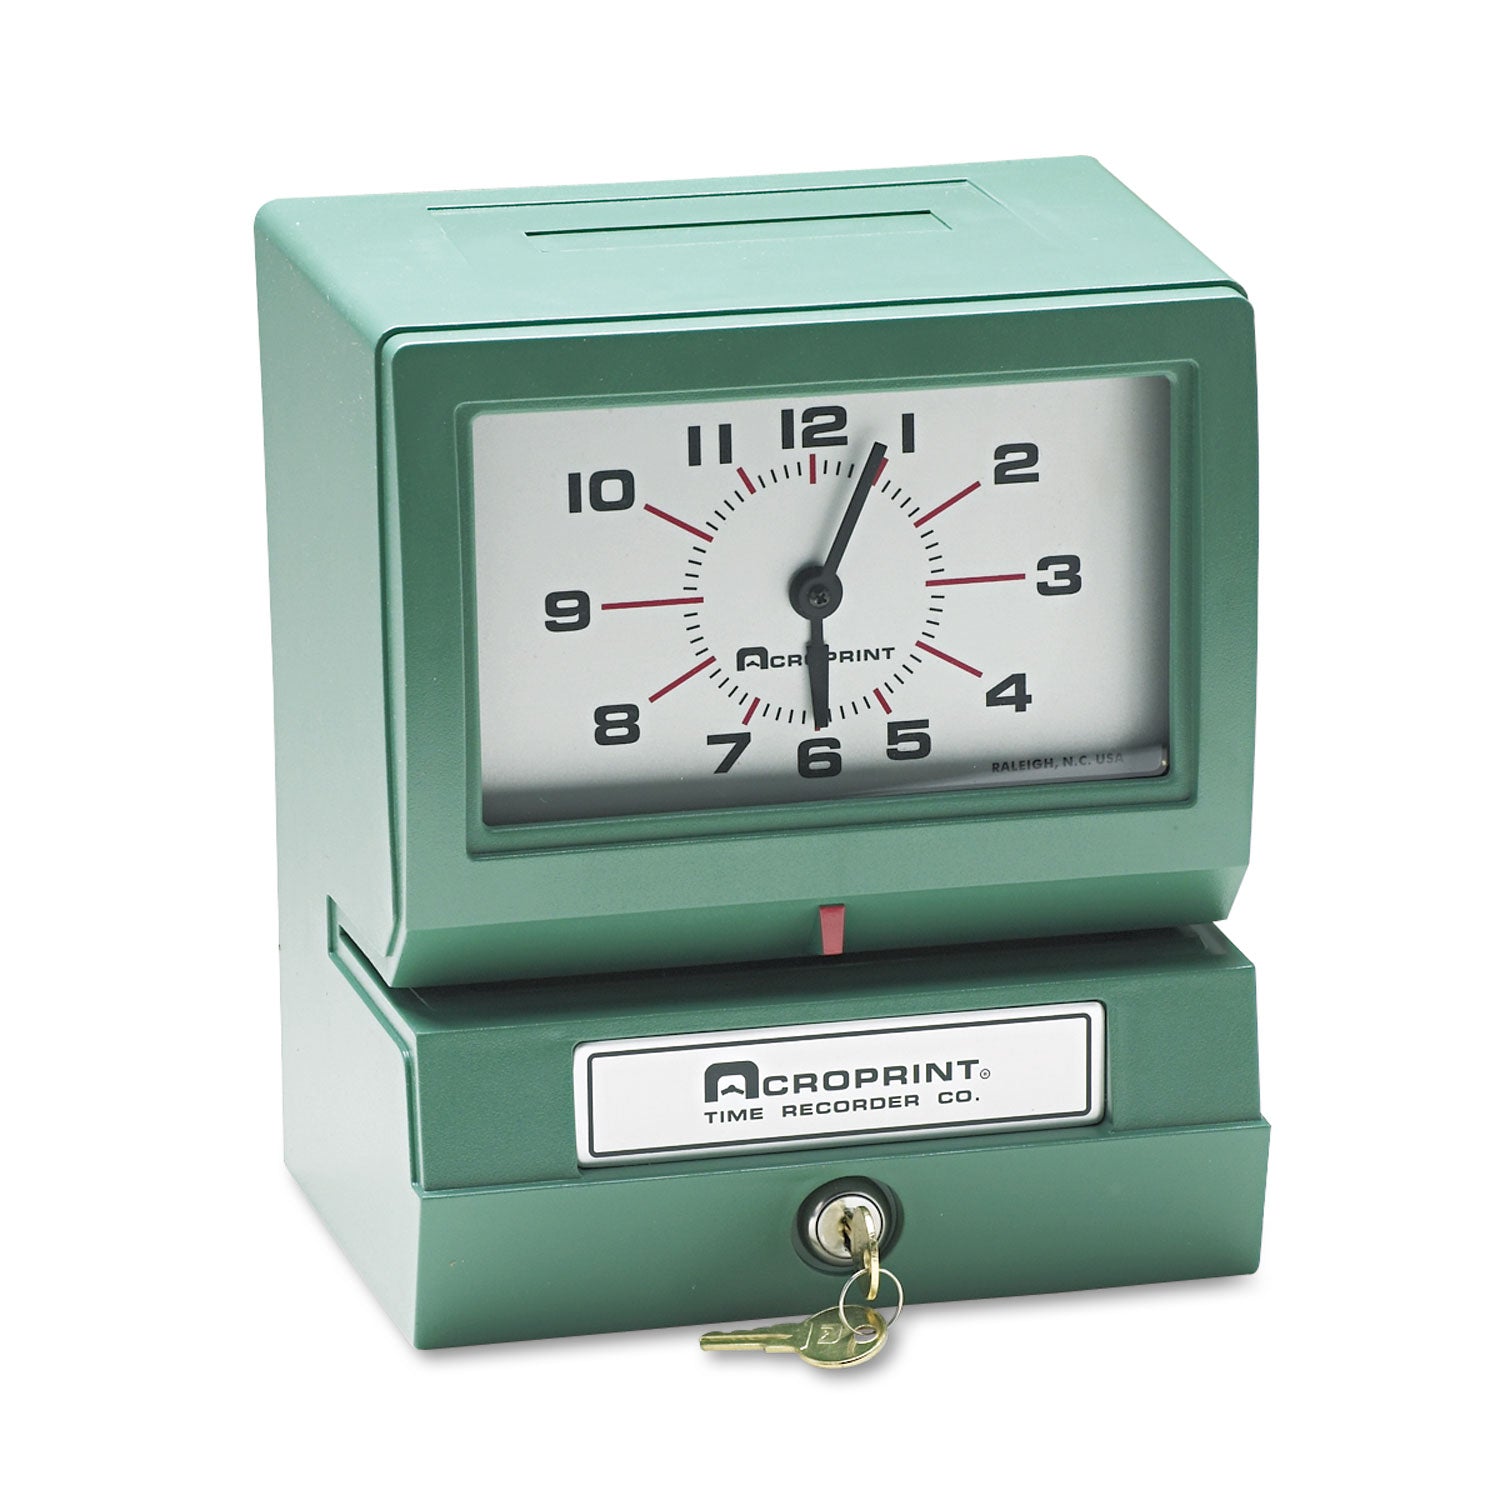 Model 150 Heavy-Duty Time Recorder, Automatic Operation, Month/Date/1-12 Hours/Minutes, Green - 